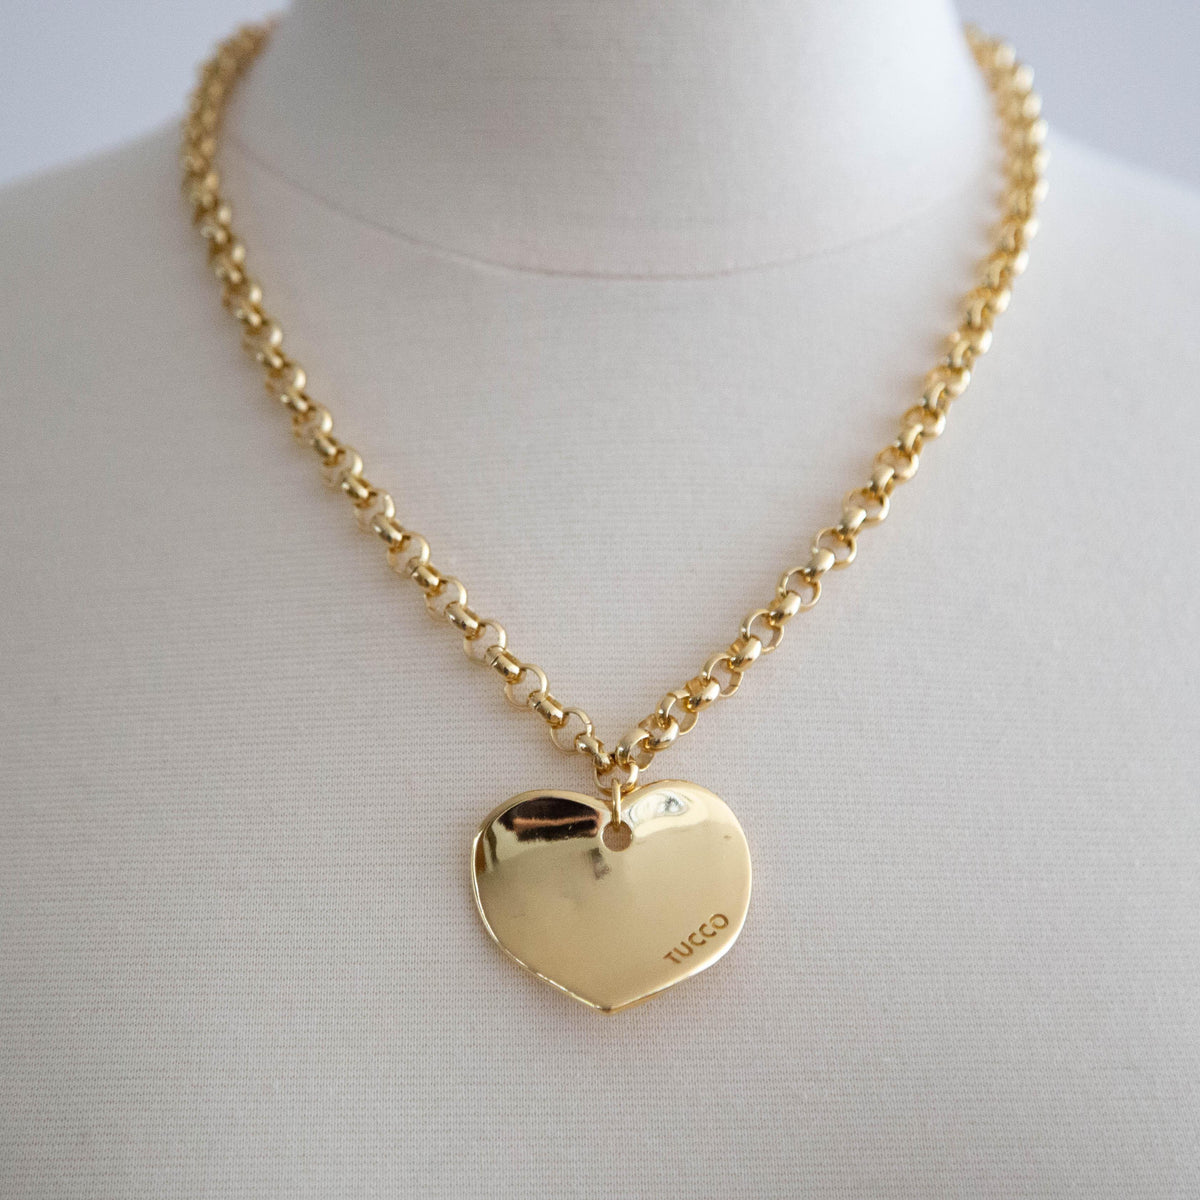 Gold Pendant Necklace - Gold Heart and Stone Necklace | Ana Luisa | Online  Jewelry Store At Prices You'll Love